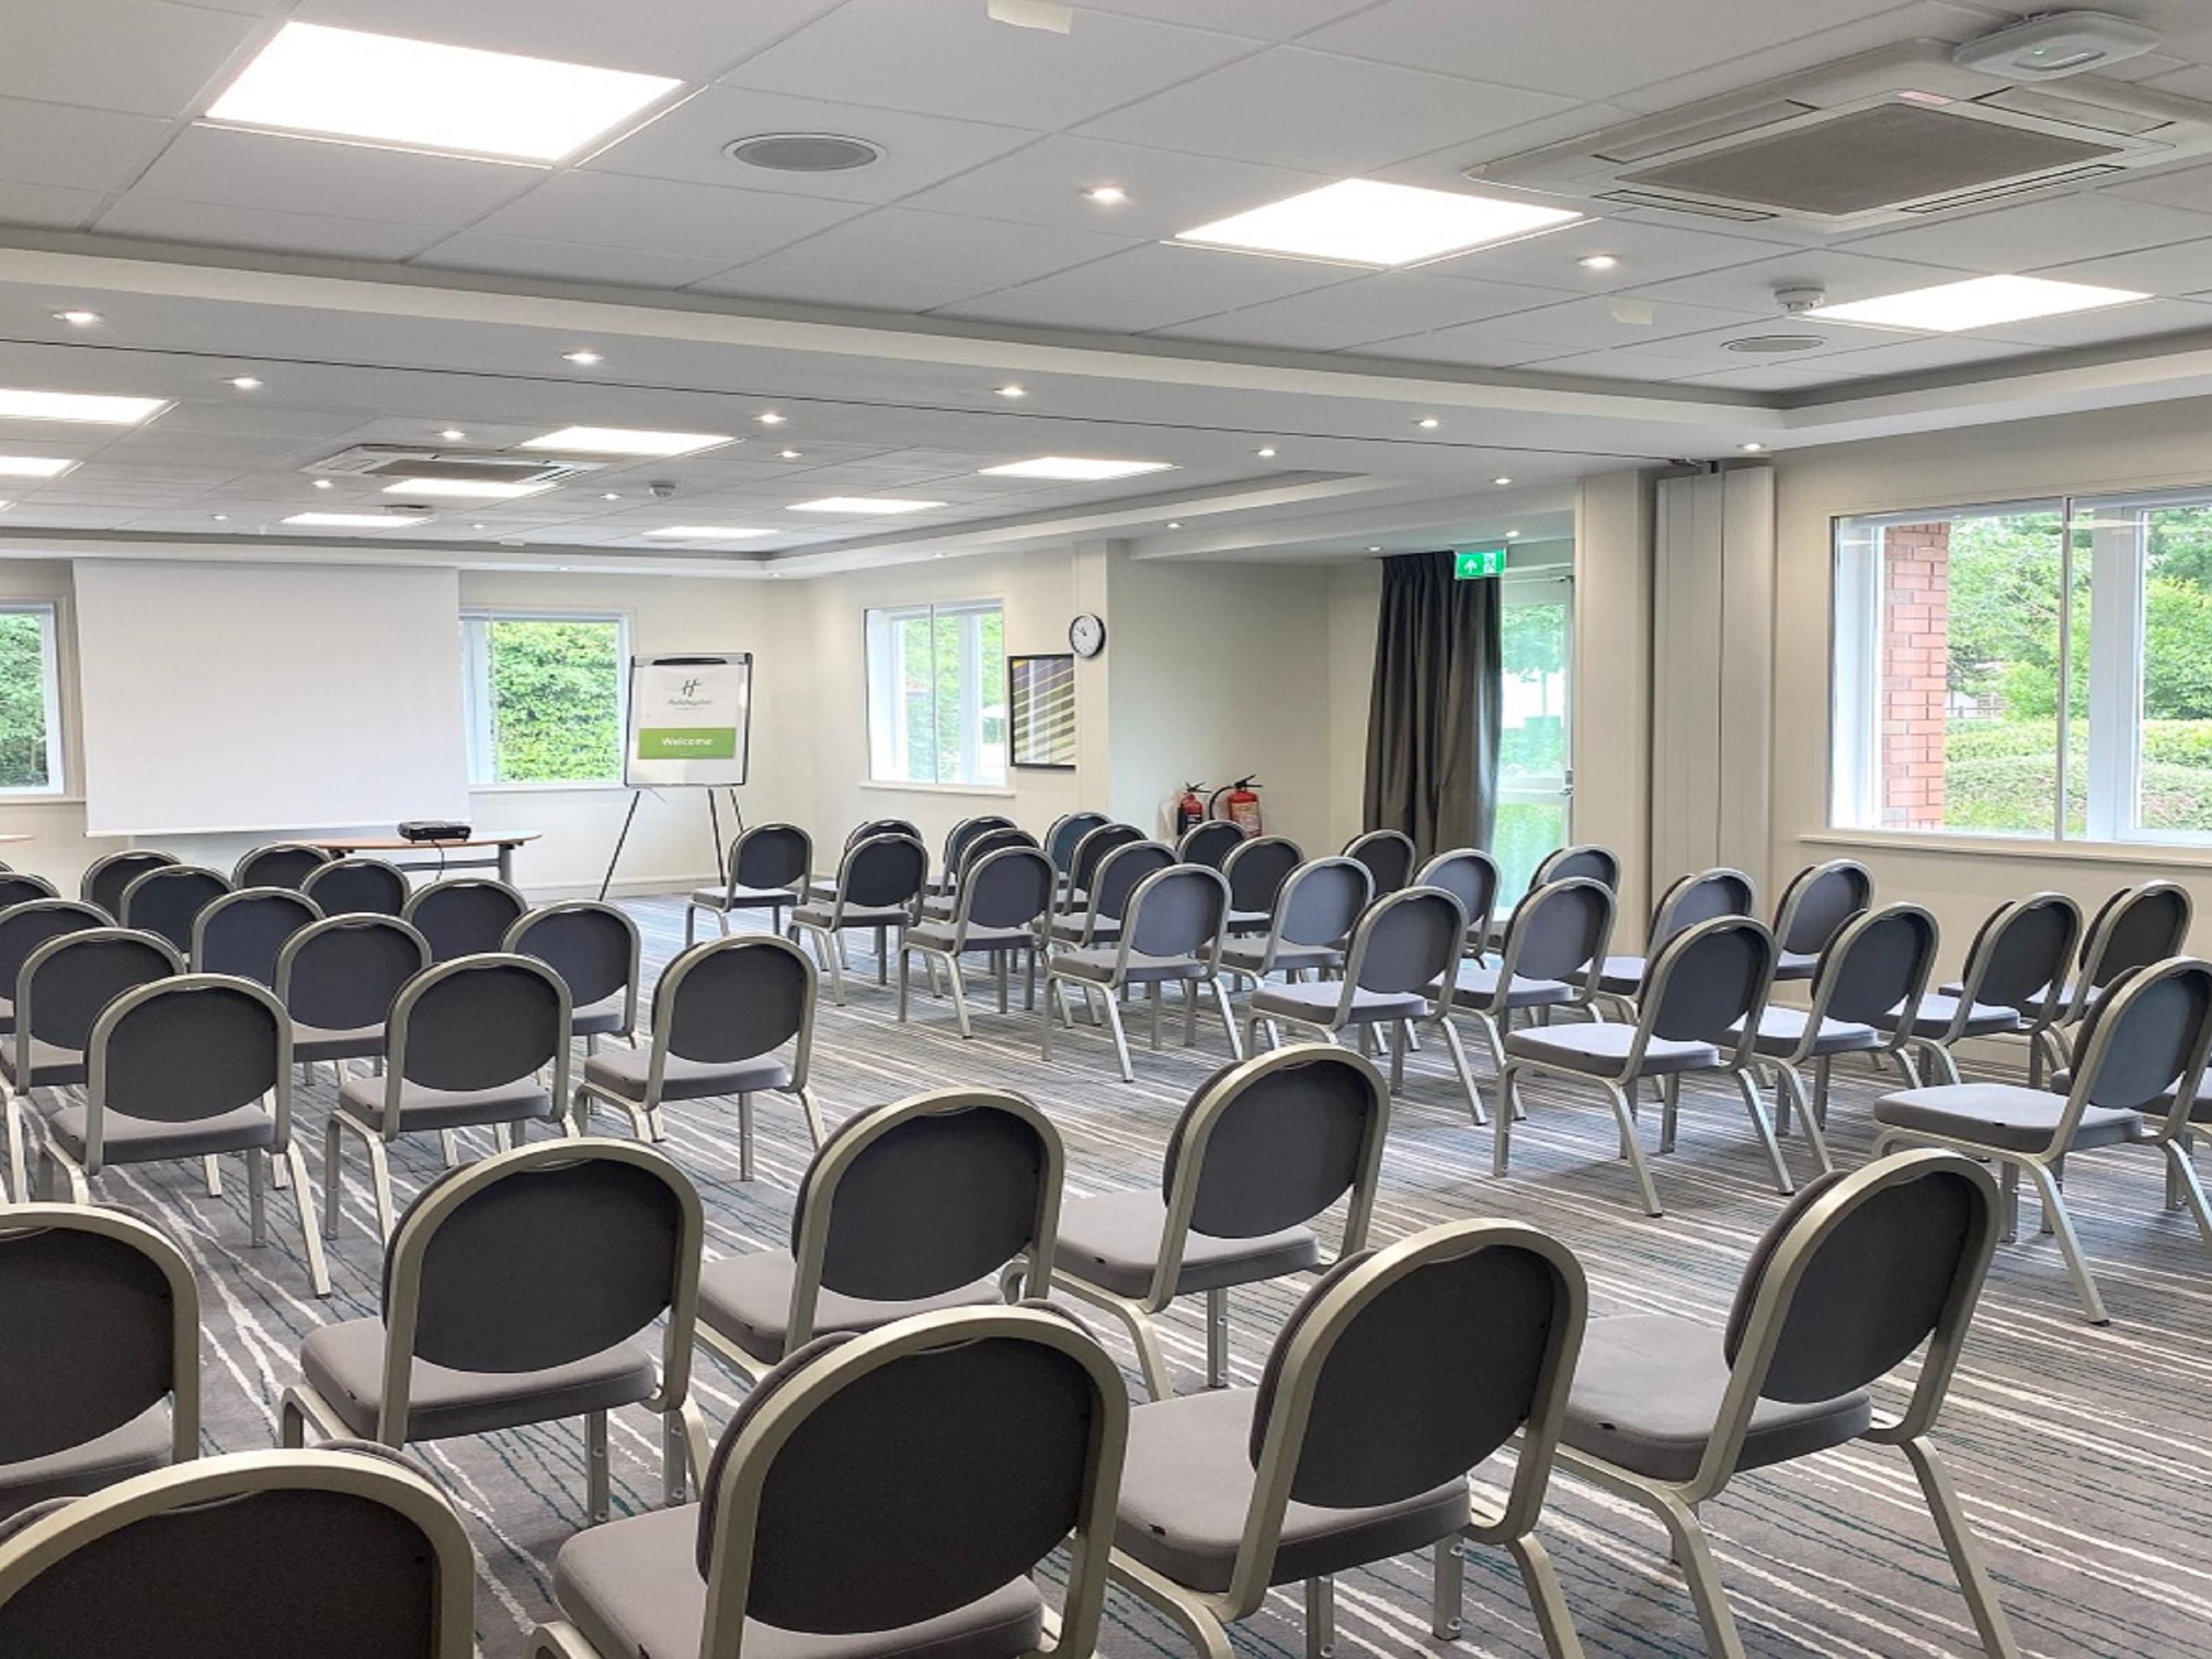 The hotel offers 7 meeting rooms, ranging from boardroom for 2 or functions for up to 120 guests.  Expect great service, wonderful food selections and all your AV needs. Please contact us for further details